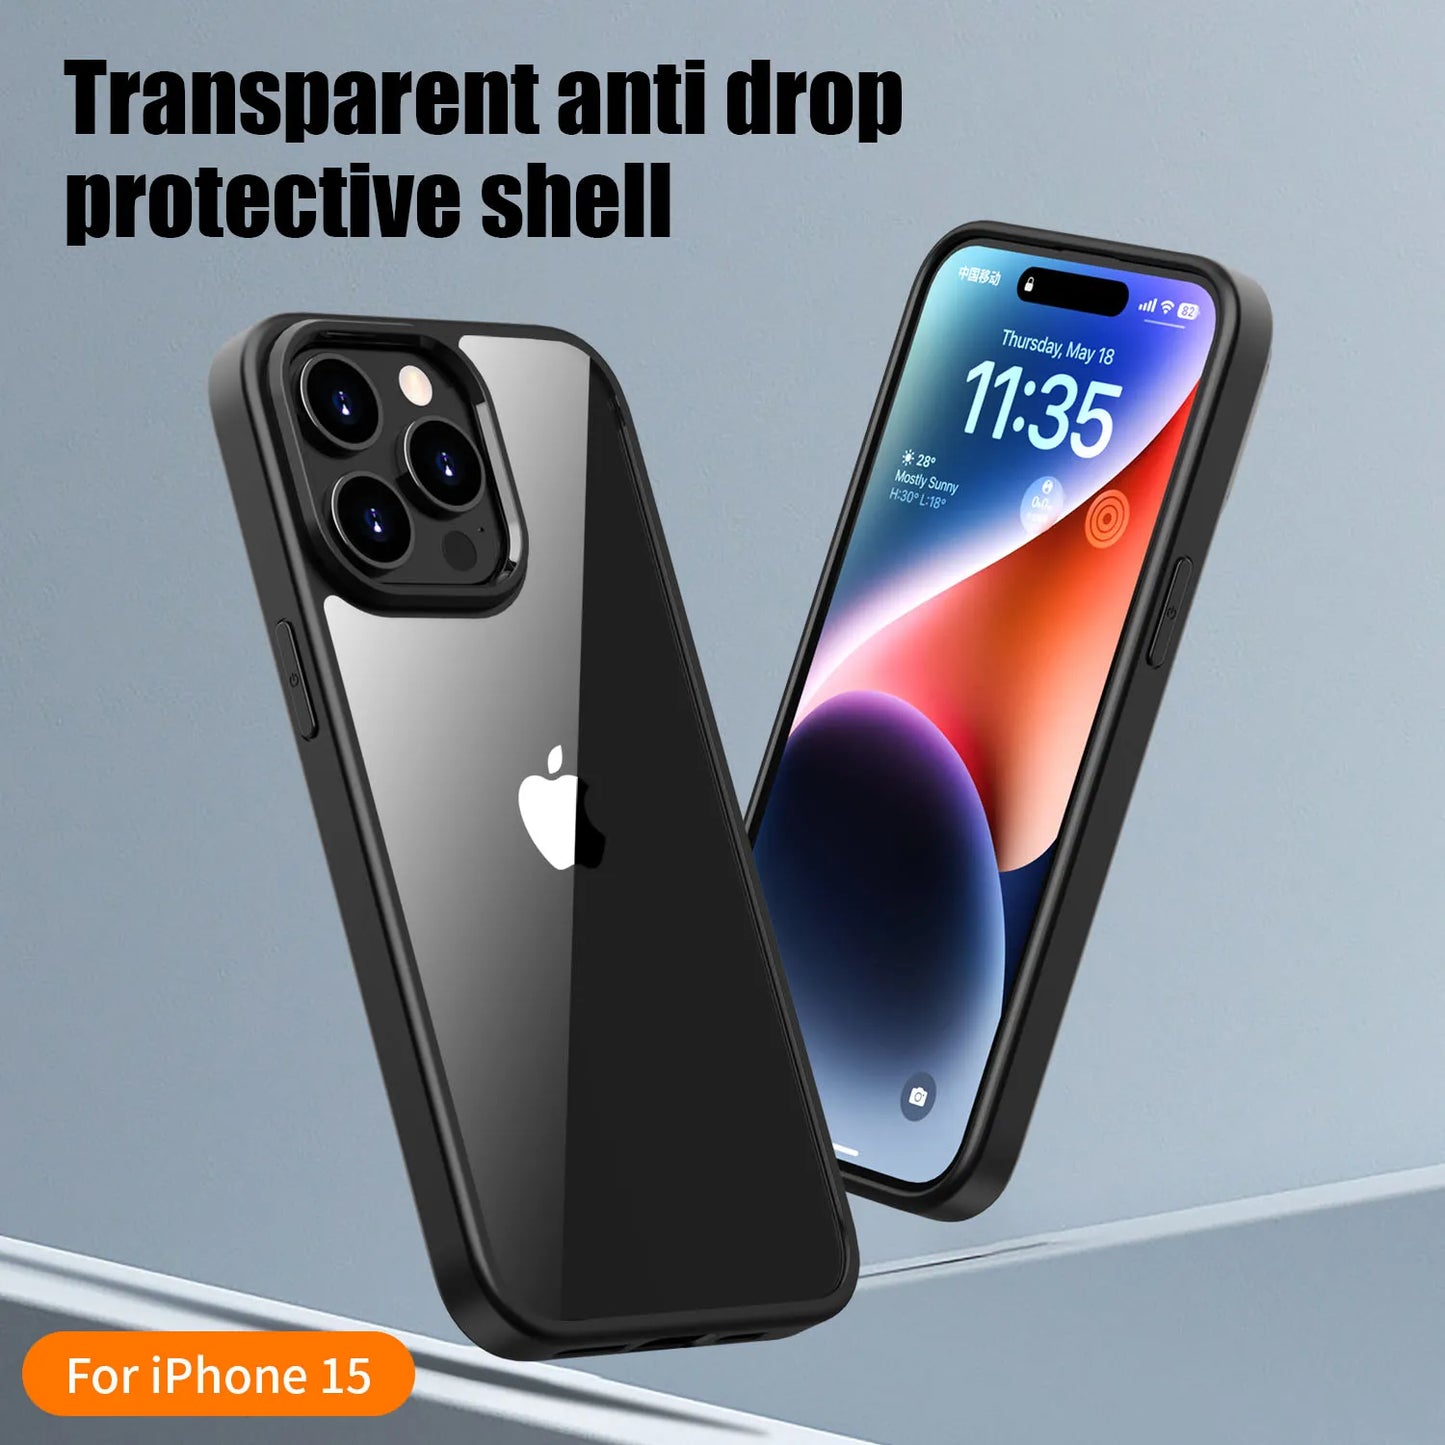  iPhone 15 back case, iPhone 15 back cover ,iPhone 15 plus back case, iPhone 15 Plus back cover, iPhone 15 Pro back case, iPhone 15 Pro back Cover, iphone 11 back cover, iphone 11 pro back cover, iphone back cover, iphone 11 back cover, iphone 15 cover iphone 15 pro max case iphone 15 case iphone 15 pro case iphone 15 pro max cover iphone 15 phone case iphone 15 plus case iphone 15 pro max phone case best iphone 15 pro case iphone 15 pro cover iphone 15 pro max back cover iphone 12 back cover